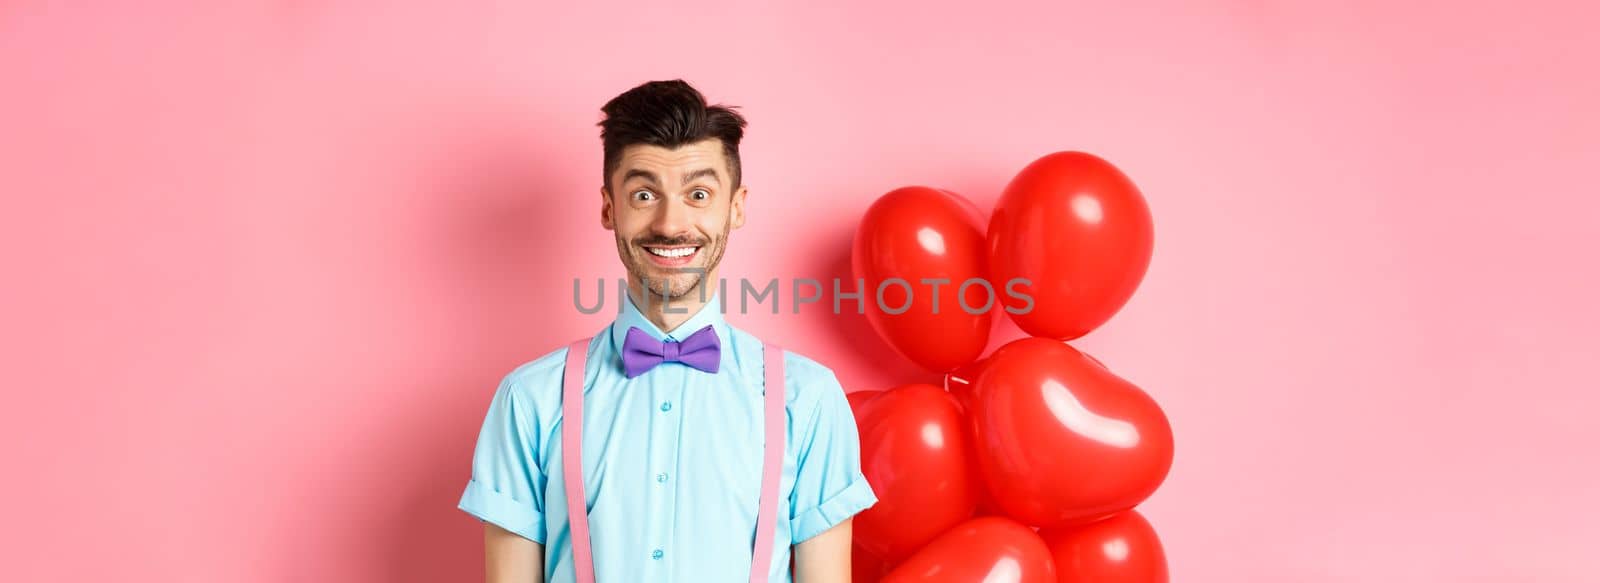 Valentines day concept. Image of handsome young man looking excited and surprised, smiling while standing on romantic pink background near heart balloons.